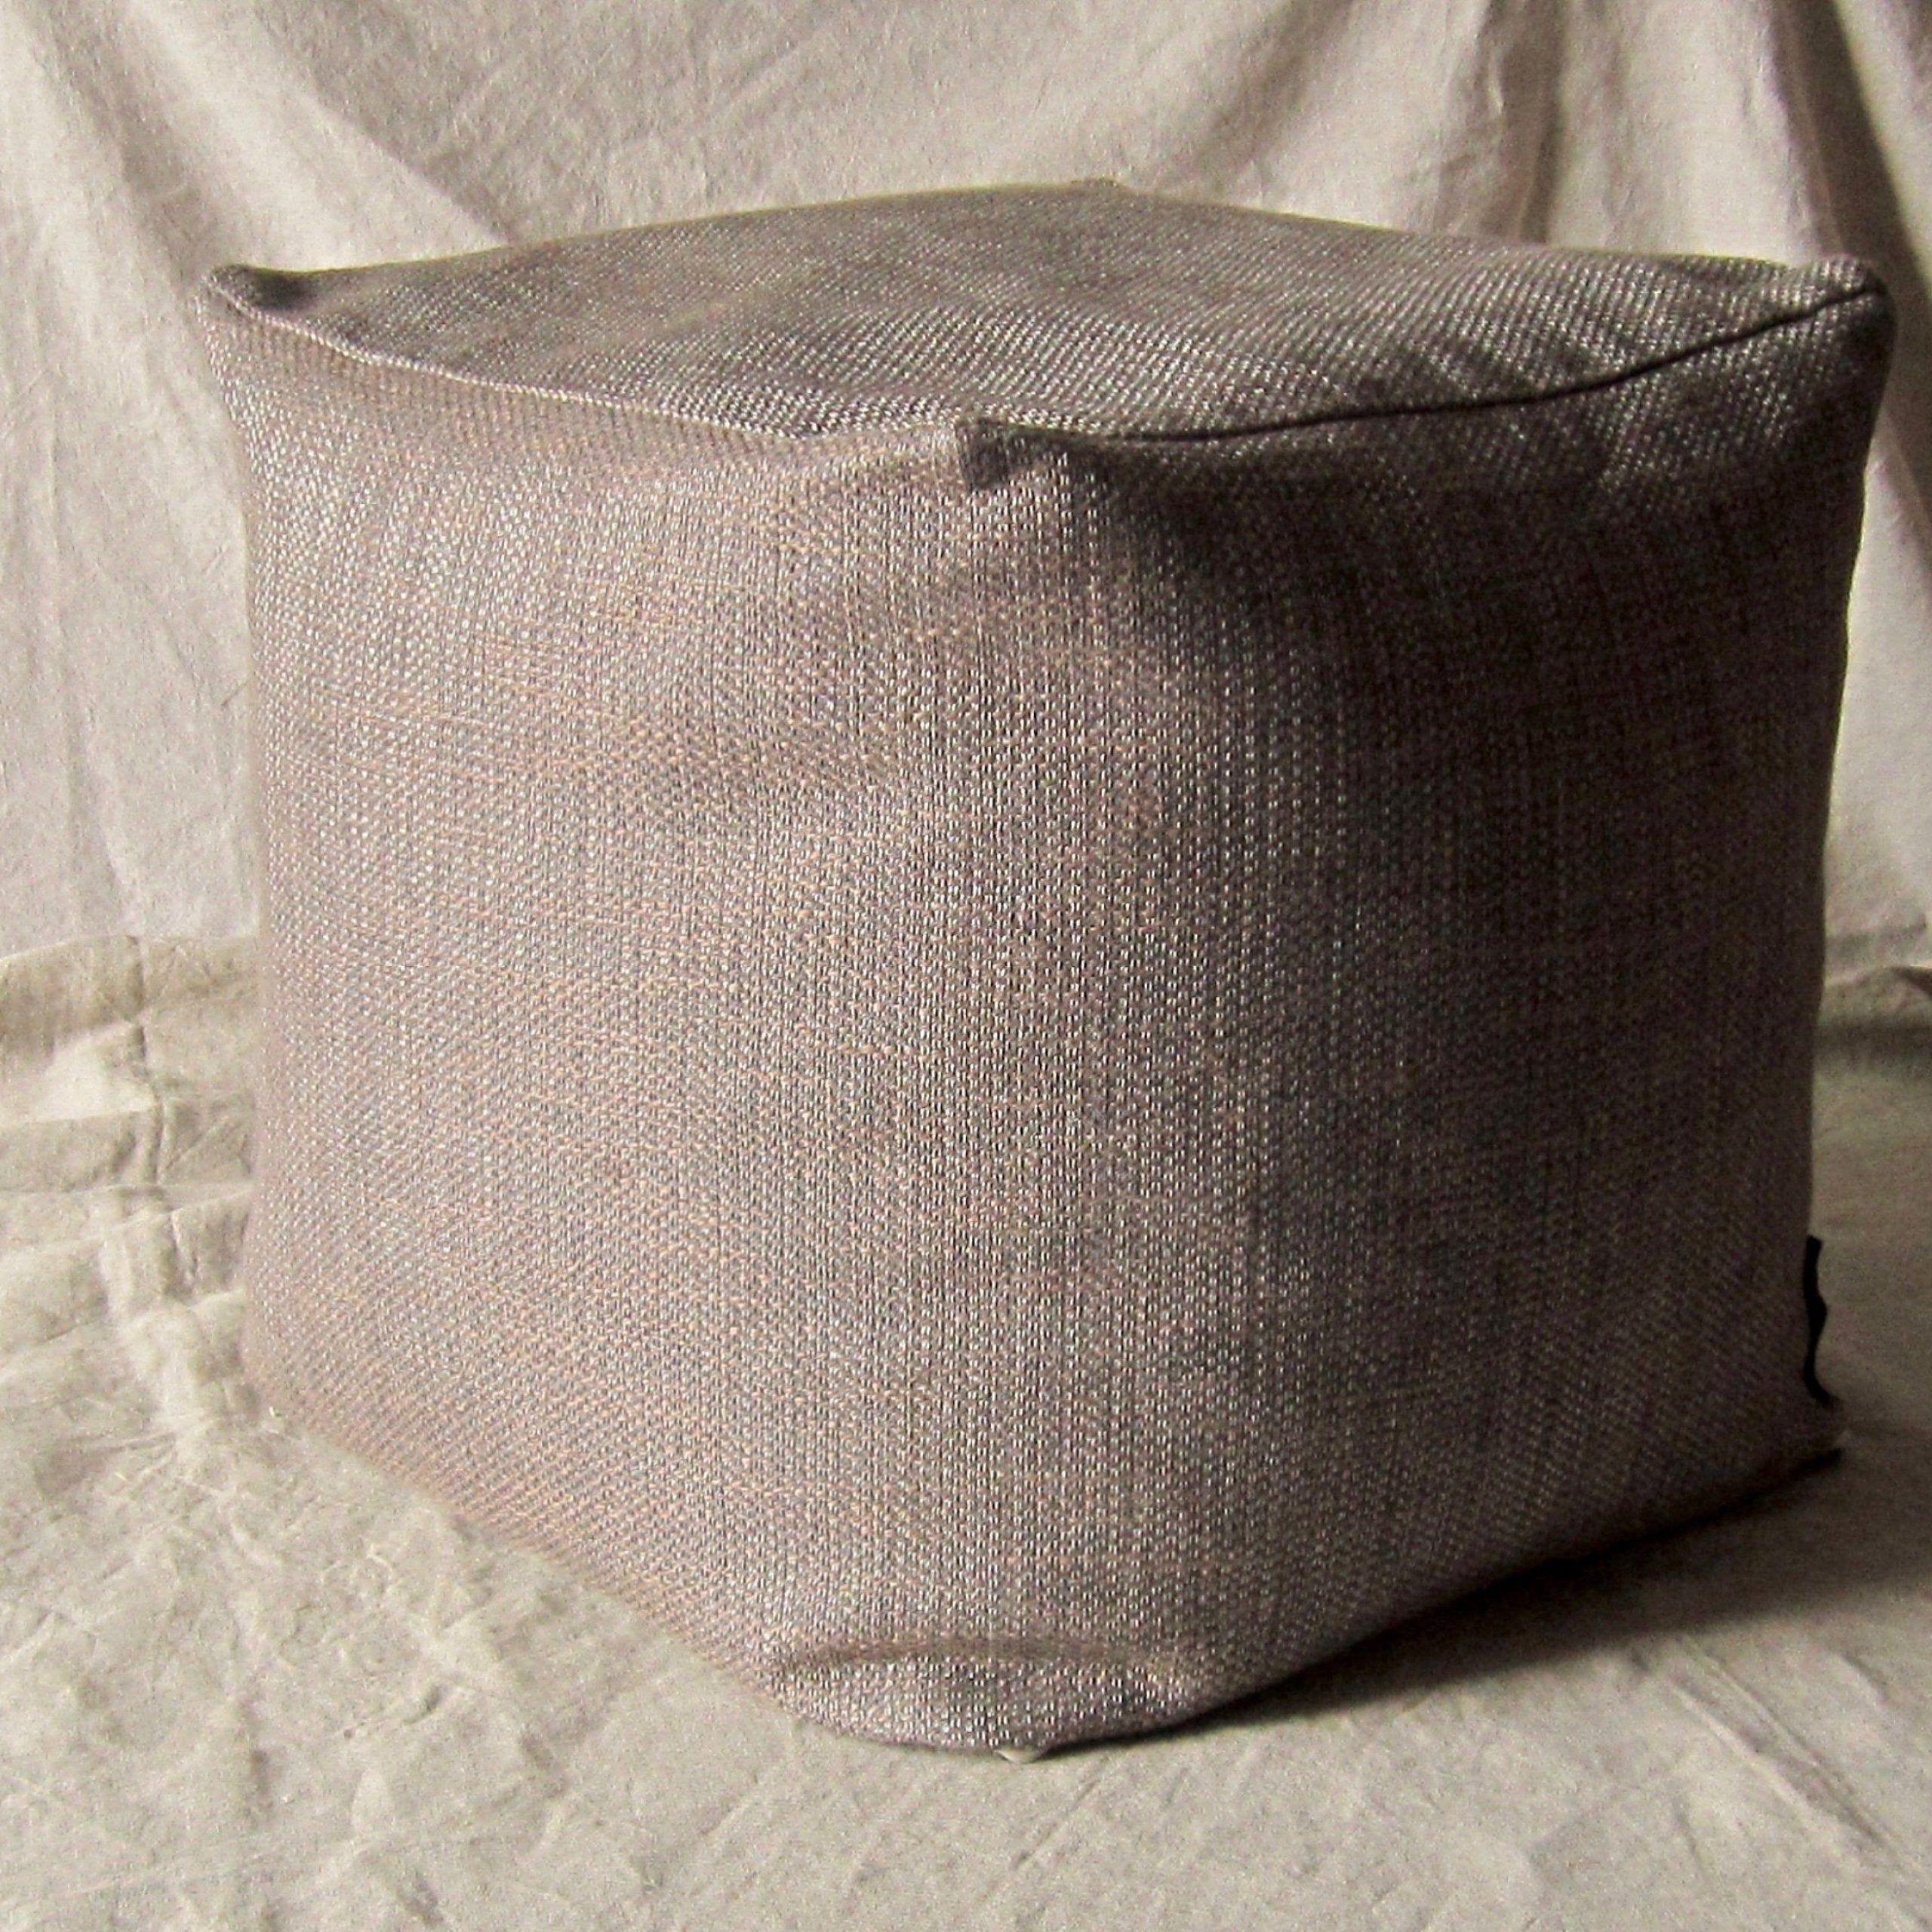 Bronze Brown Modern Pouf Cover 16x16x16 Bronze Mauve Floor | Etsy Throughout White And Blush Fabric Square Ottomans (View 4 of 20)